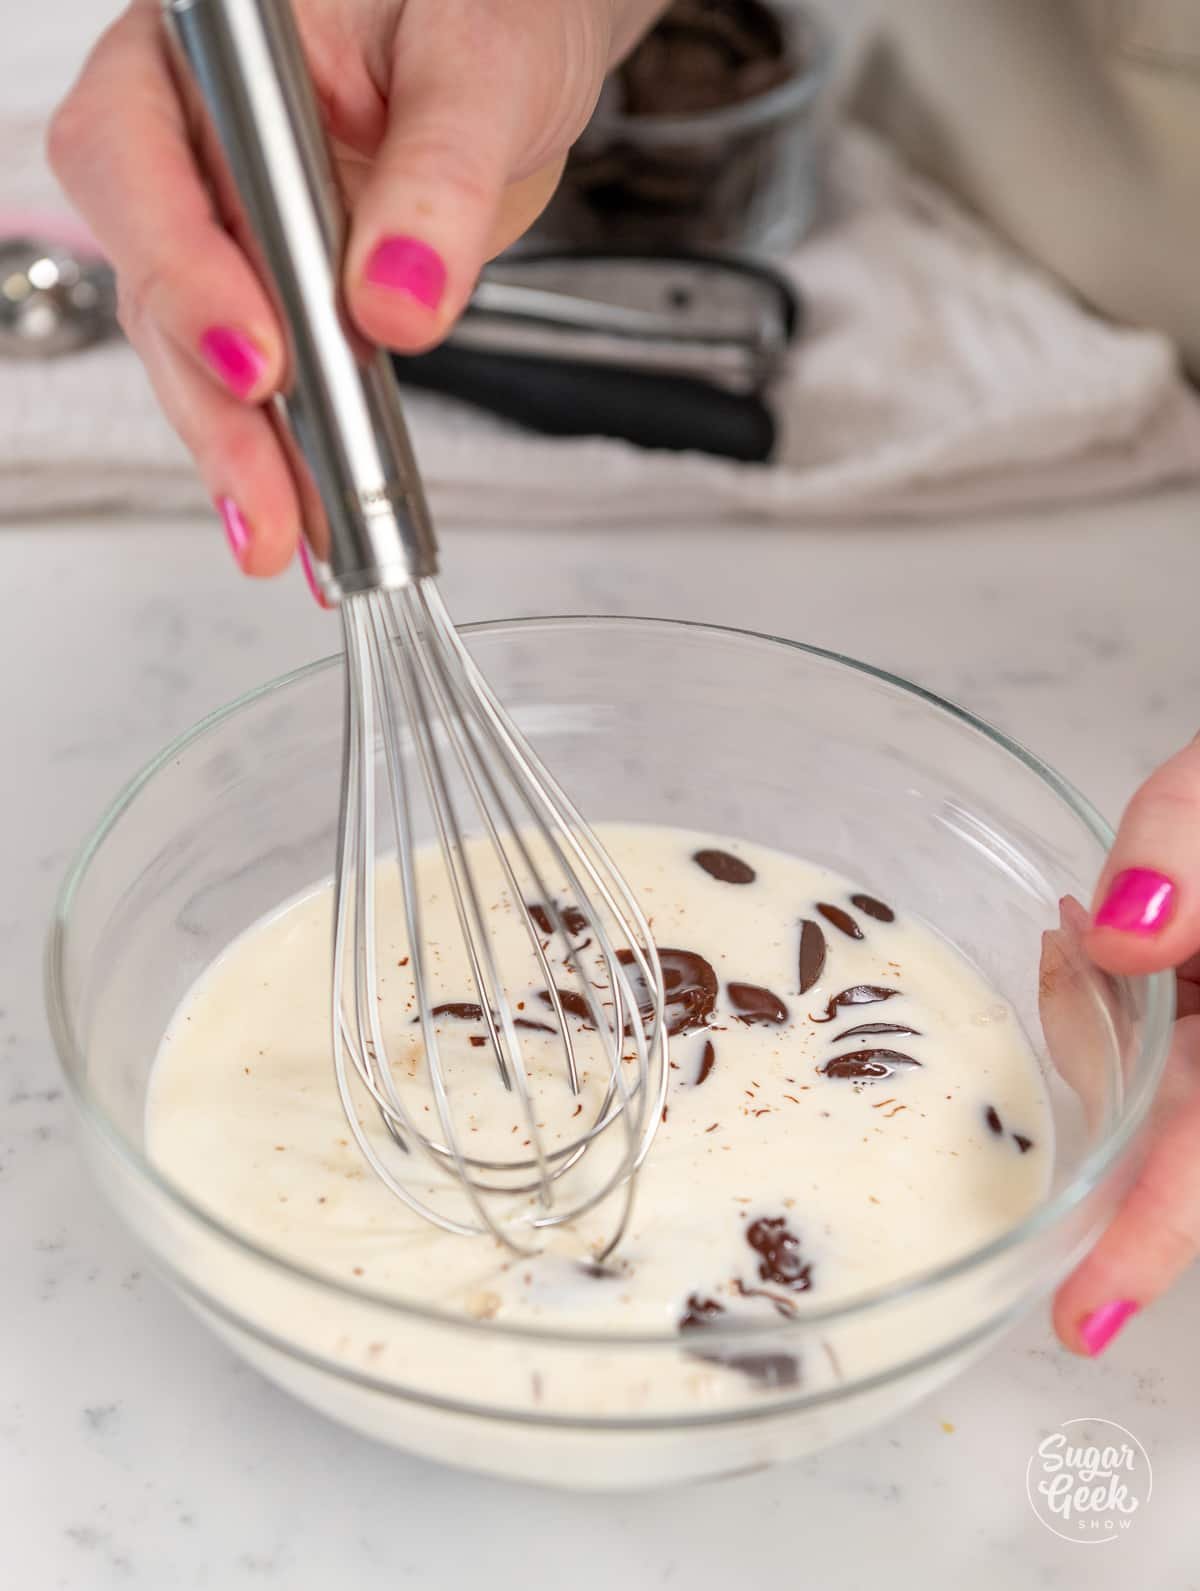 hands pushing down chocolate and cream with a whisk